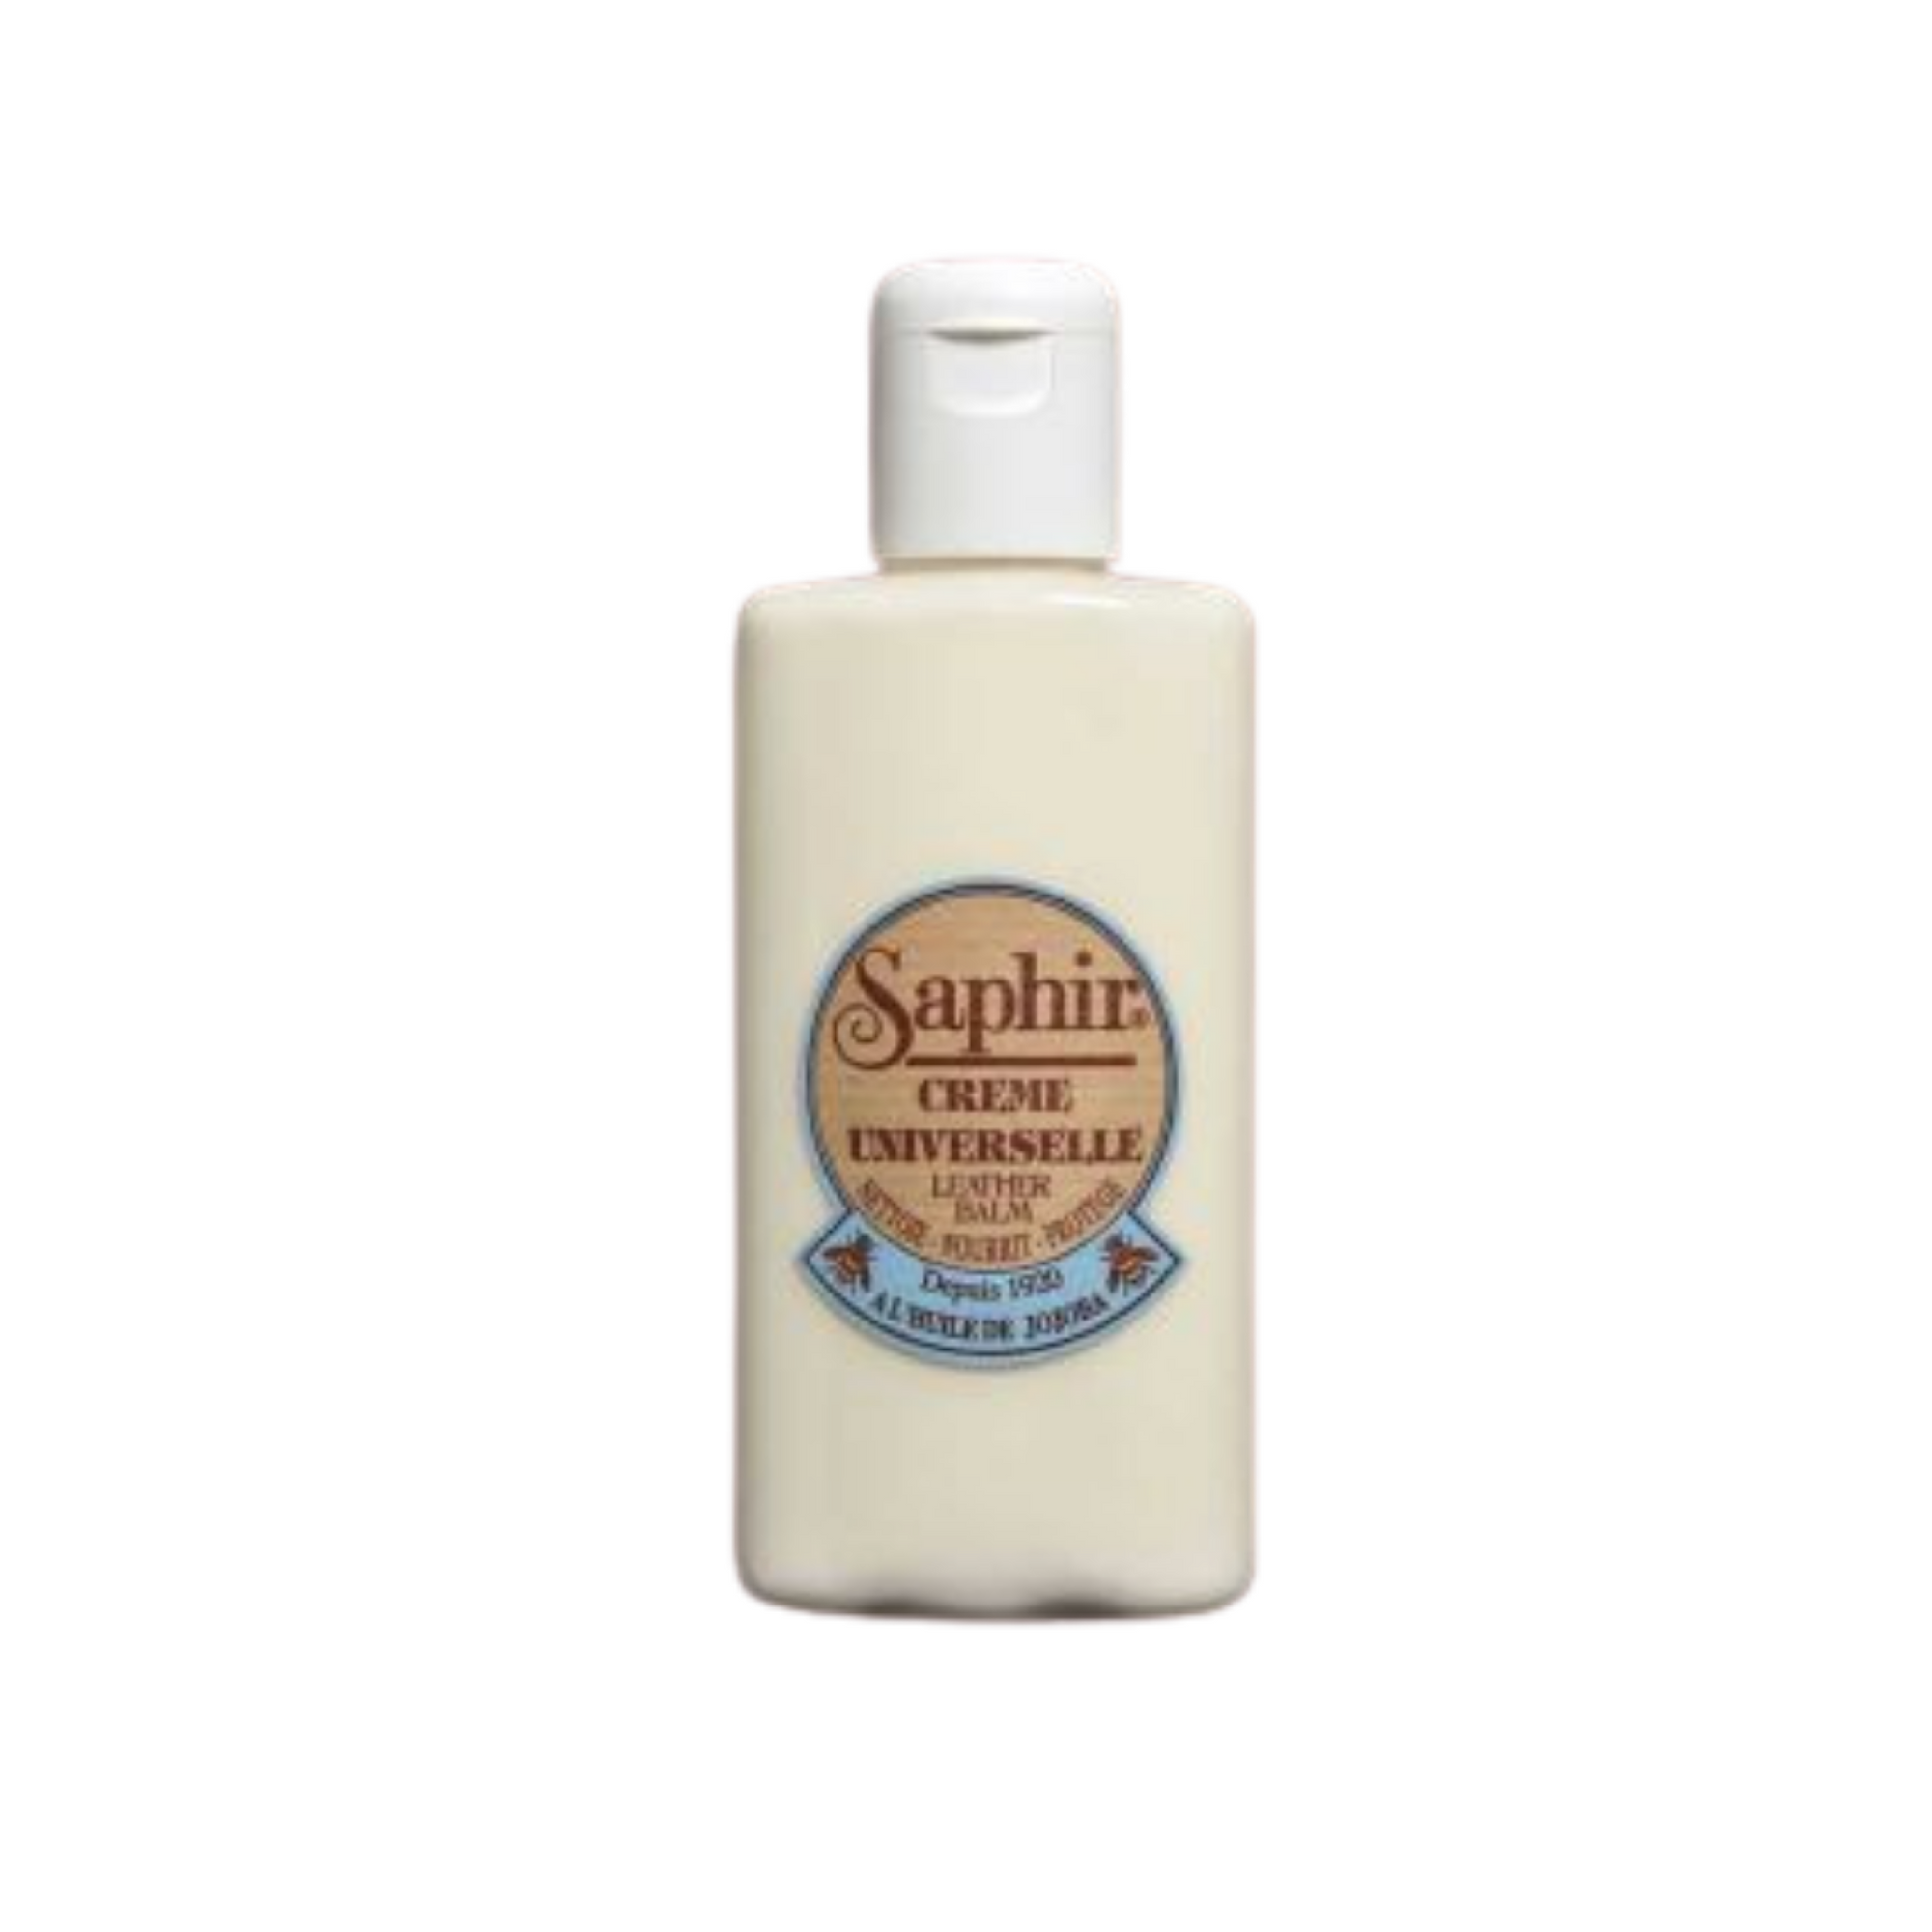 Saphir Crème Universelle is a gentle cleaning and highly nourishing leather conditioner that is an integral part of the leather-care regimen. Stocked in Little Lusso Australia